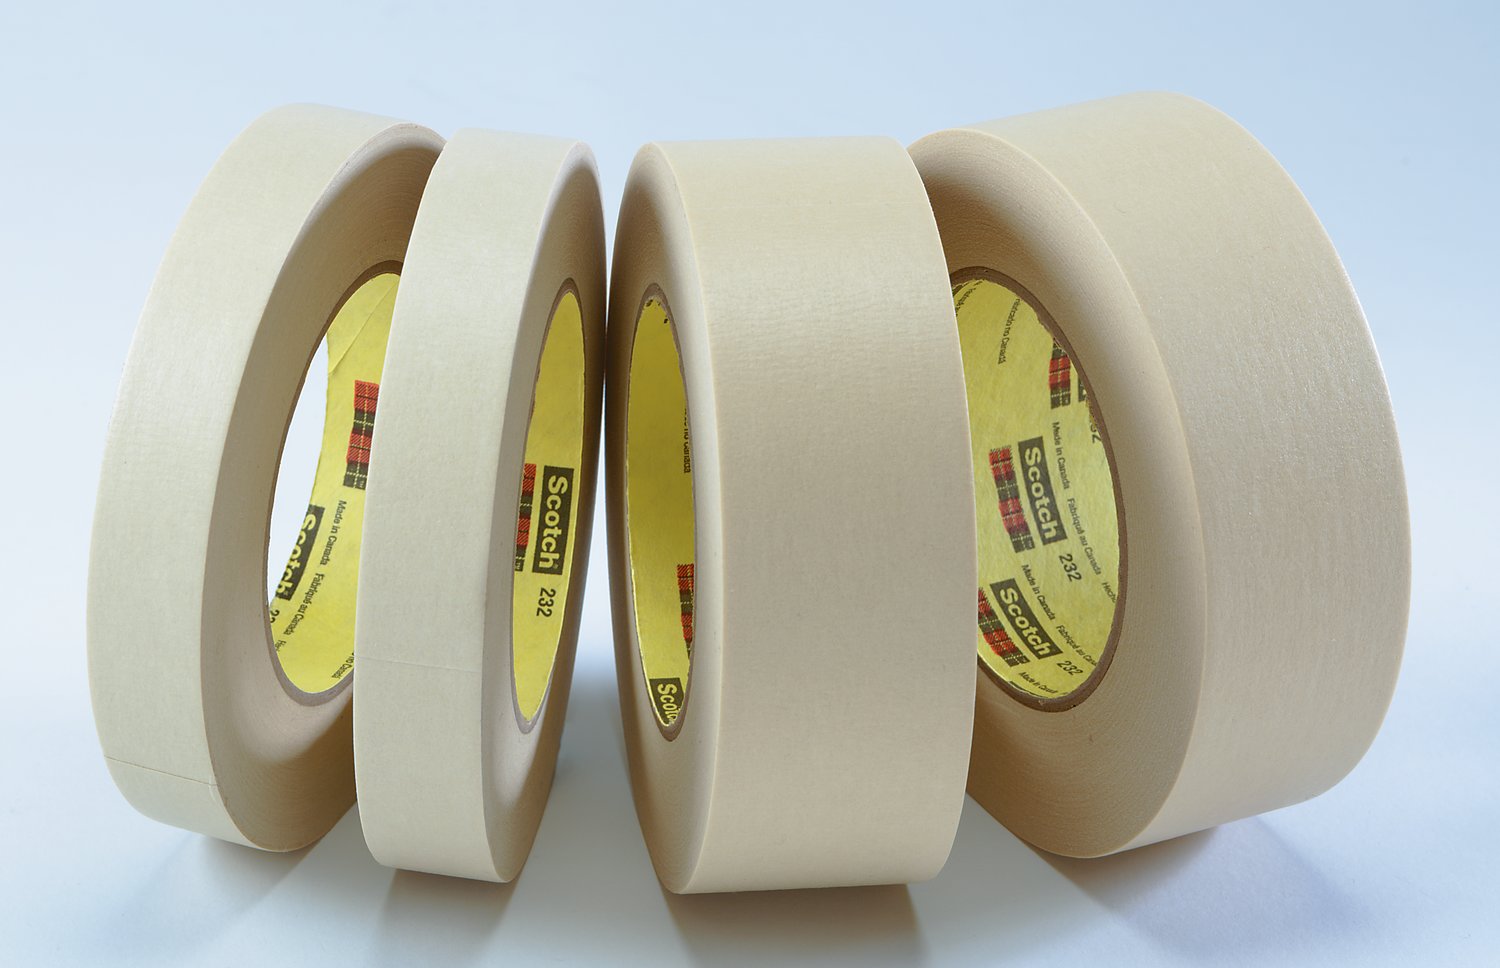 7010302065 - 3M High Performance Masking Tape 232, Tan, 12 in x 60 yd, 6.3 mil, 4
Roll/Case